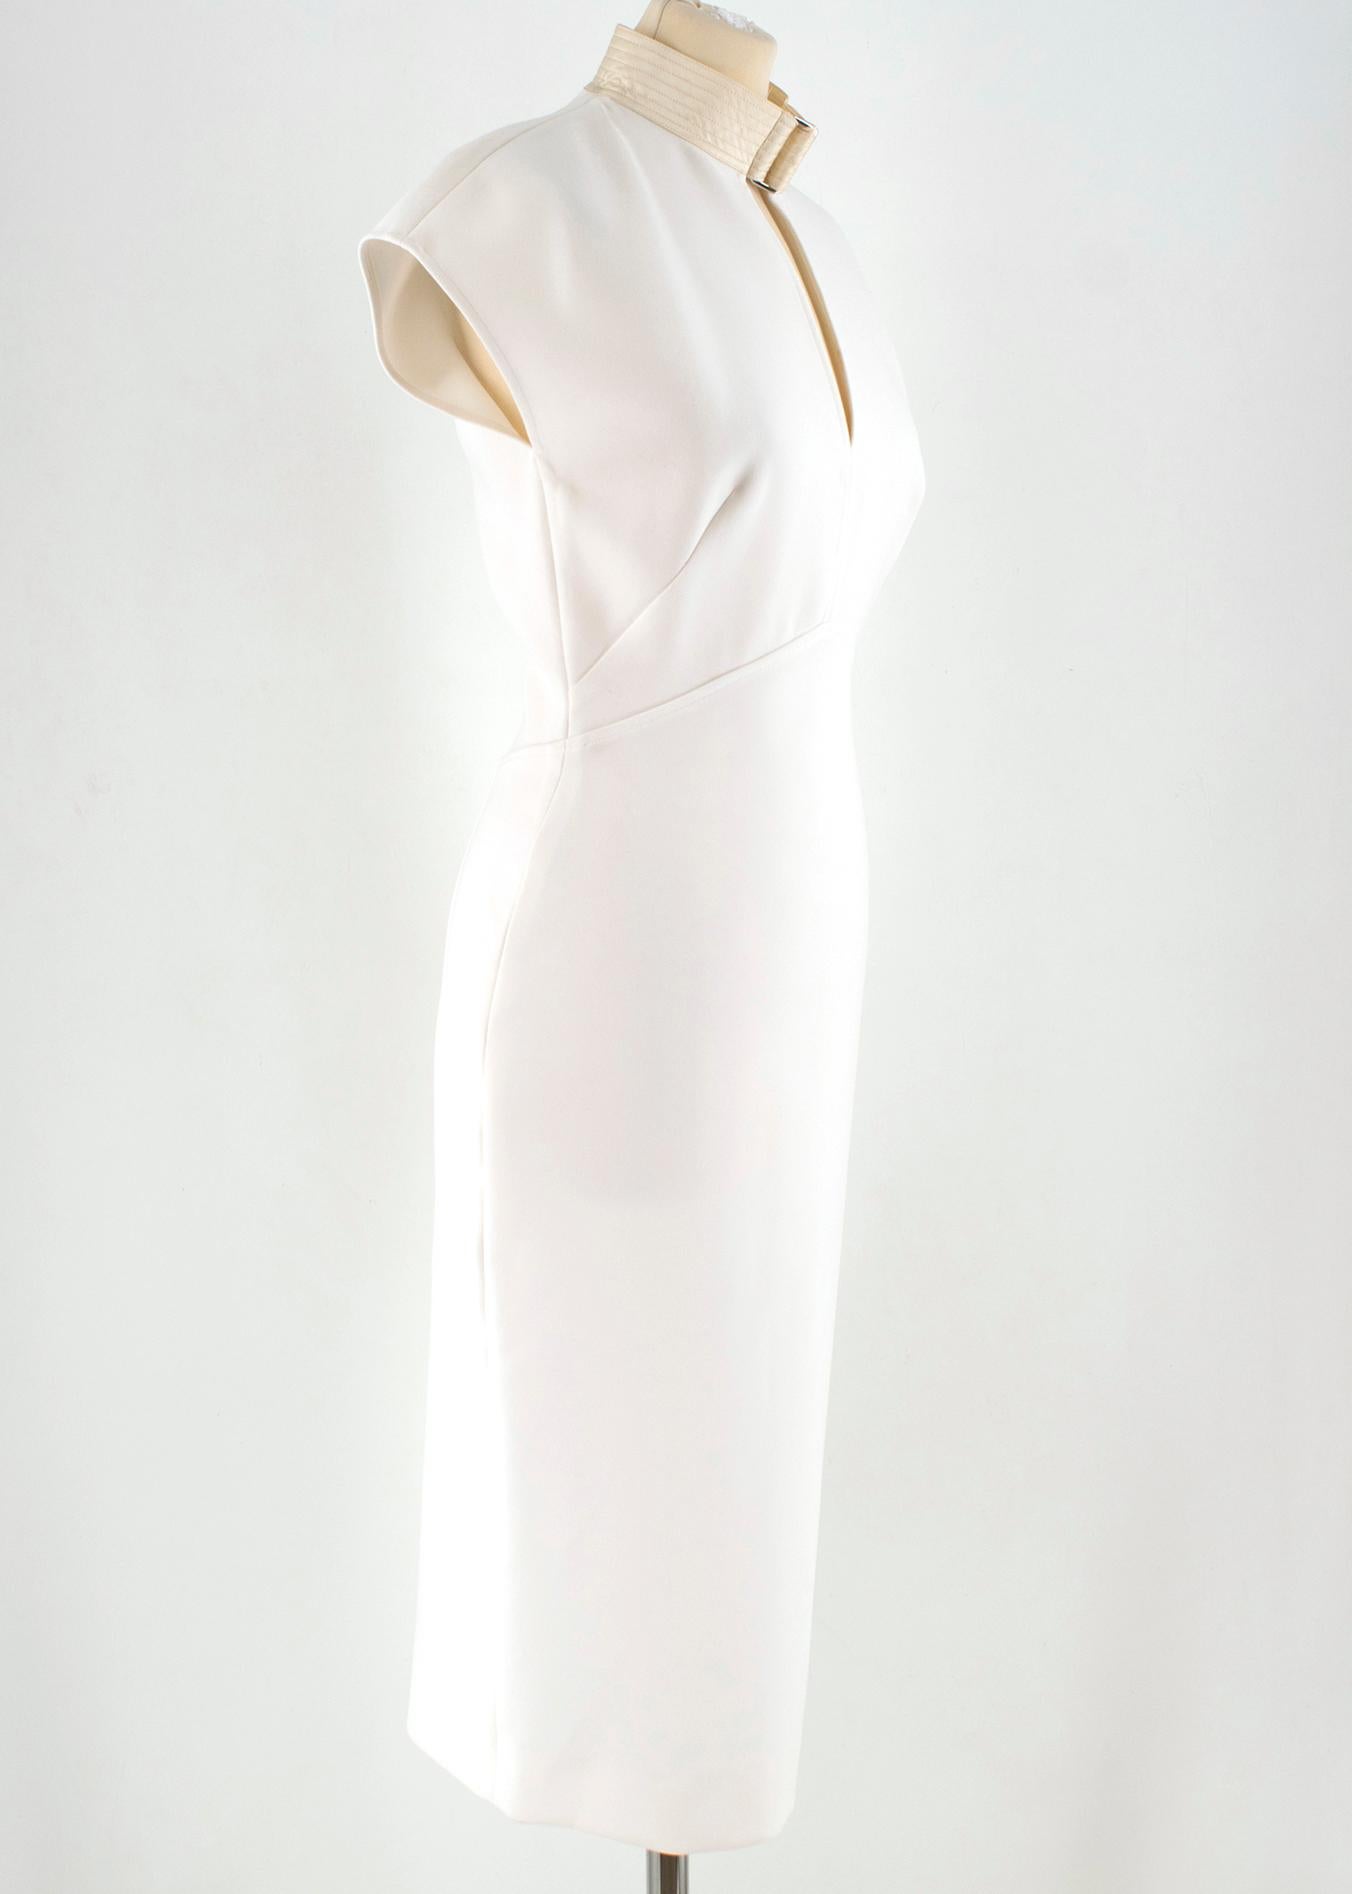 Victoria Beckham Ivory silk fitted high neck midi dress

- white midi dress
- fitted fit
- contacting zip fastening to the back
- silk collar
- unlined

Please note, these items are pre-owned and may show some signs of storage, even when unworn and